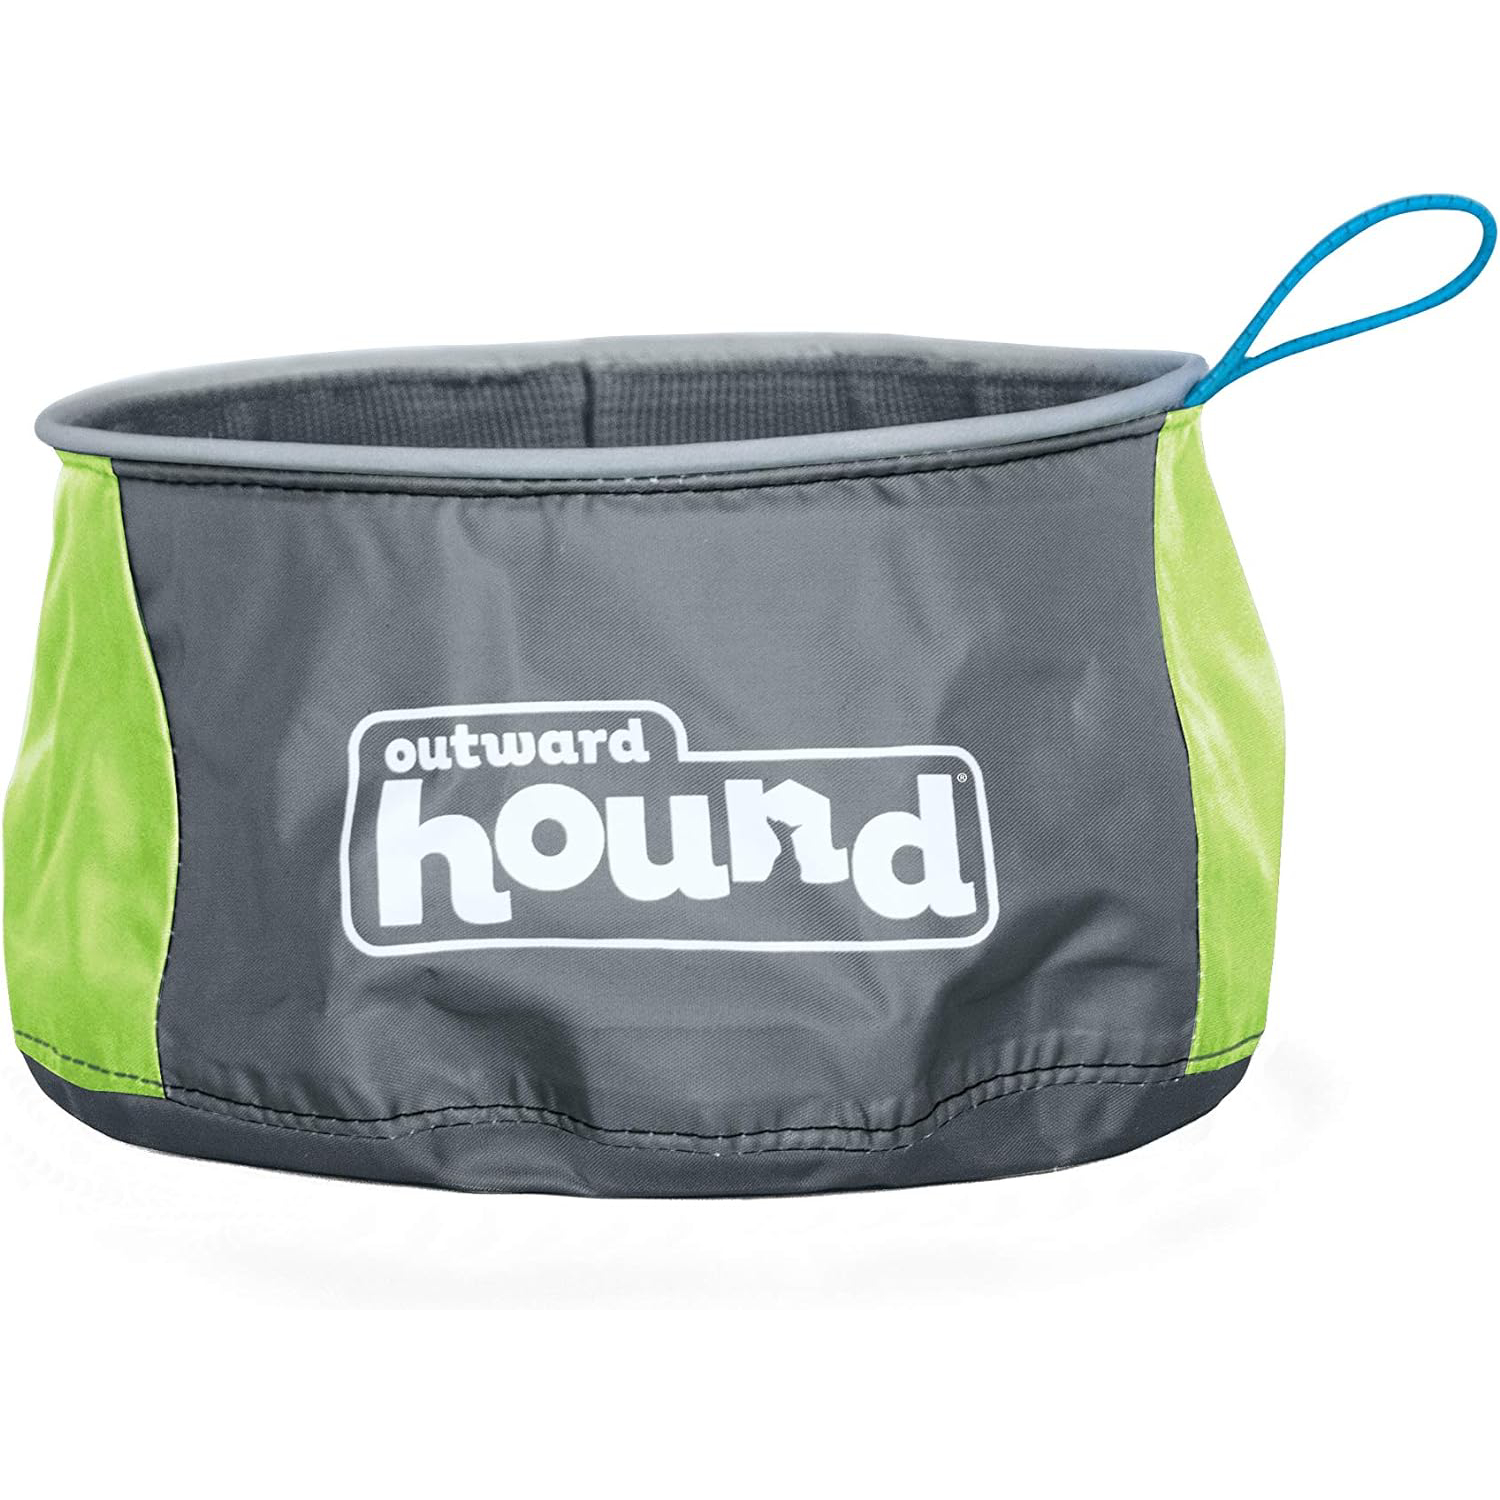 Outward Hound Collapsible Dog Water Bowl new